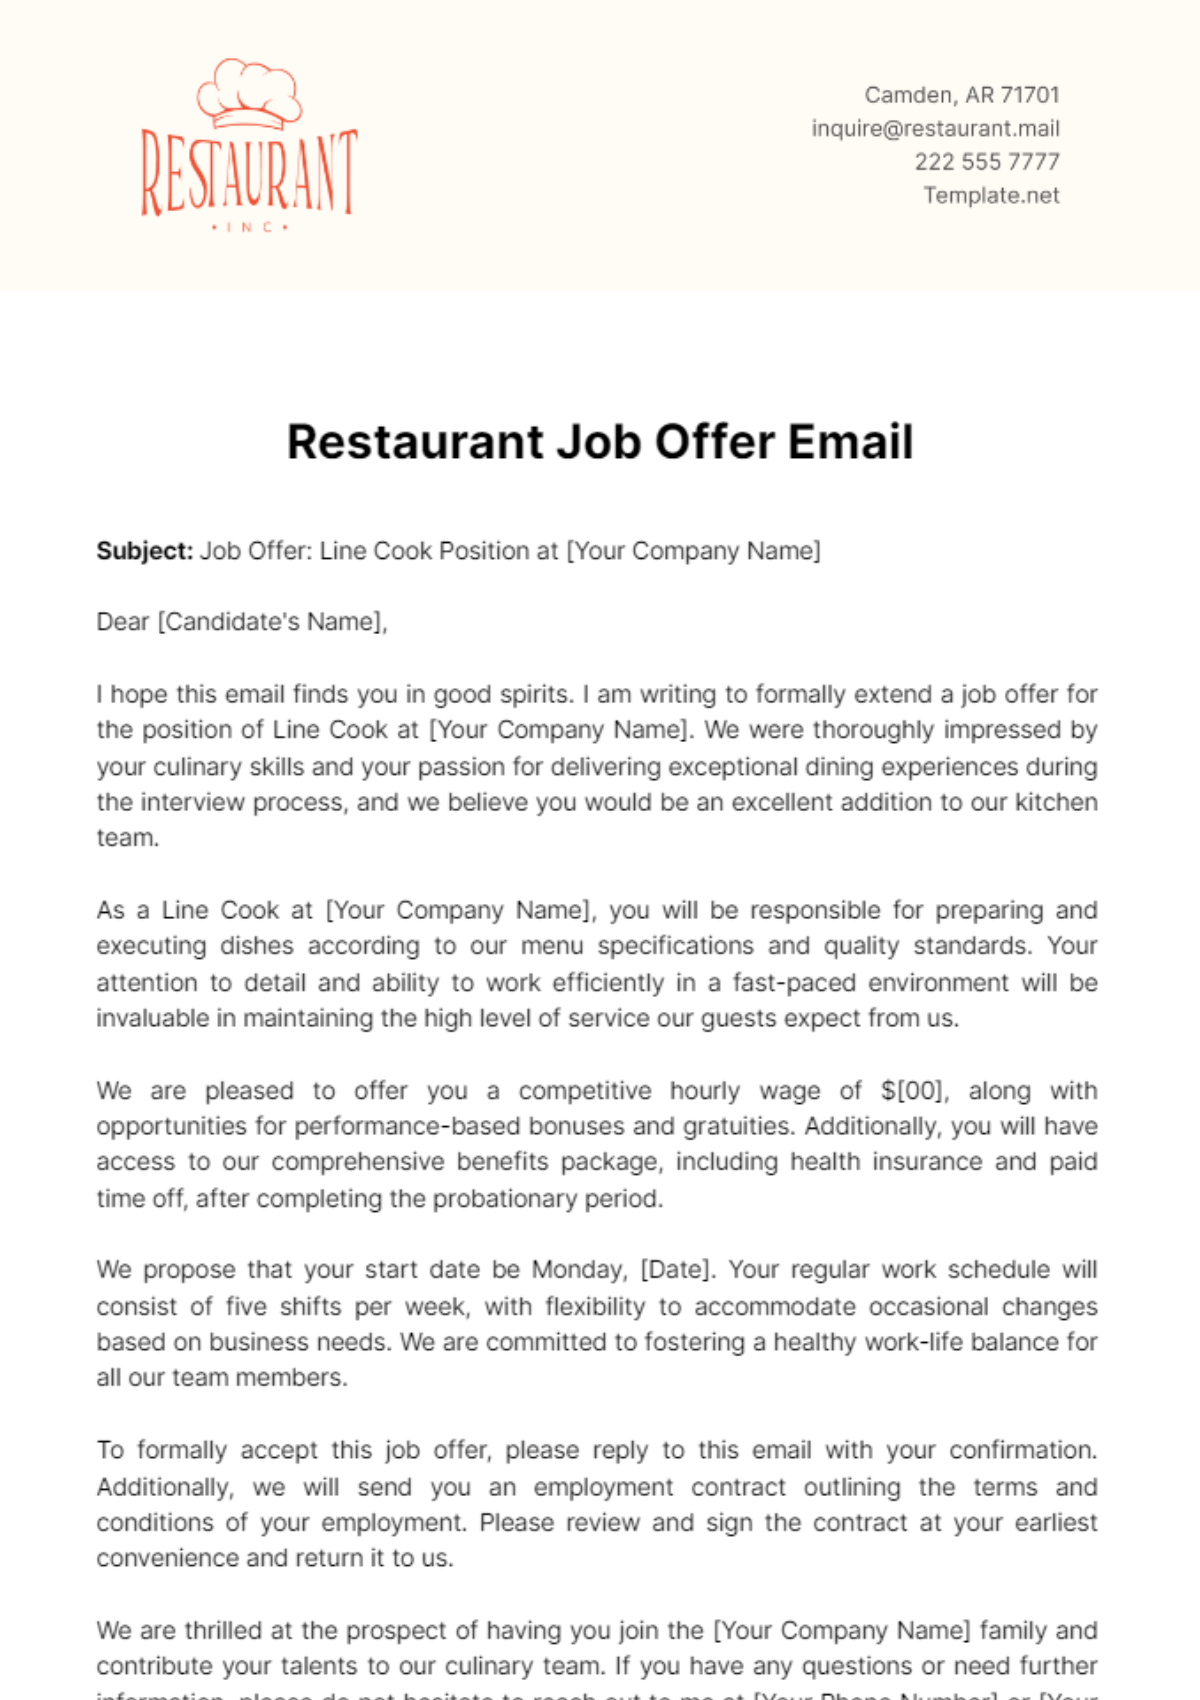 Free Restaurant Job Offer Email Template